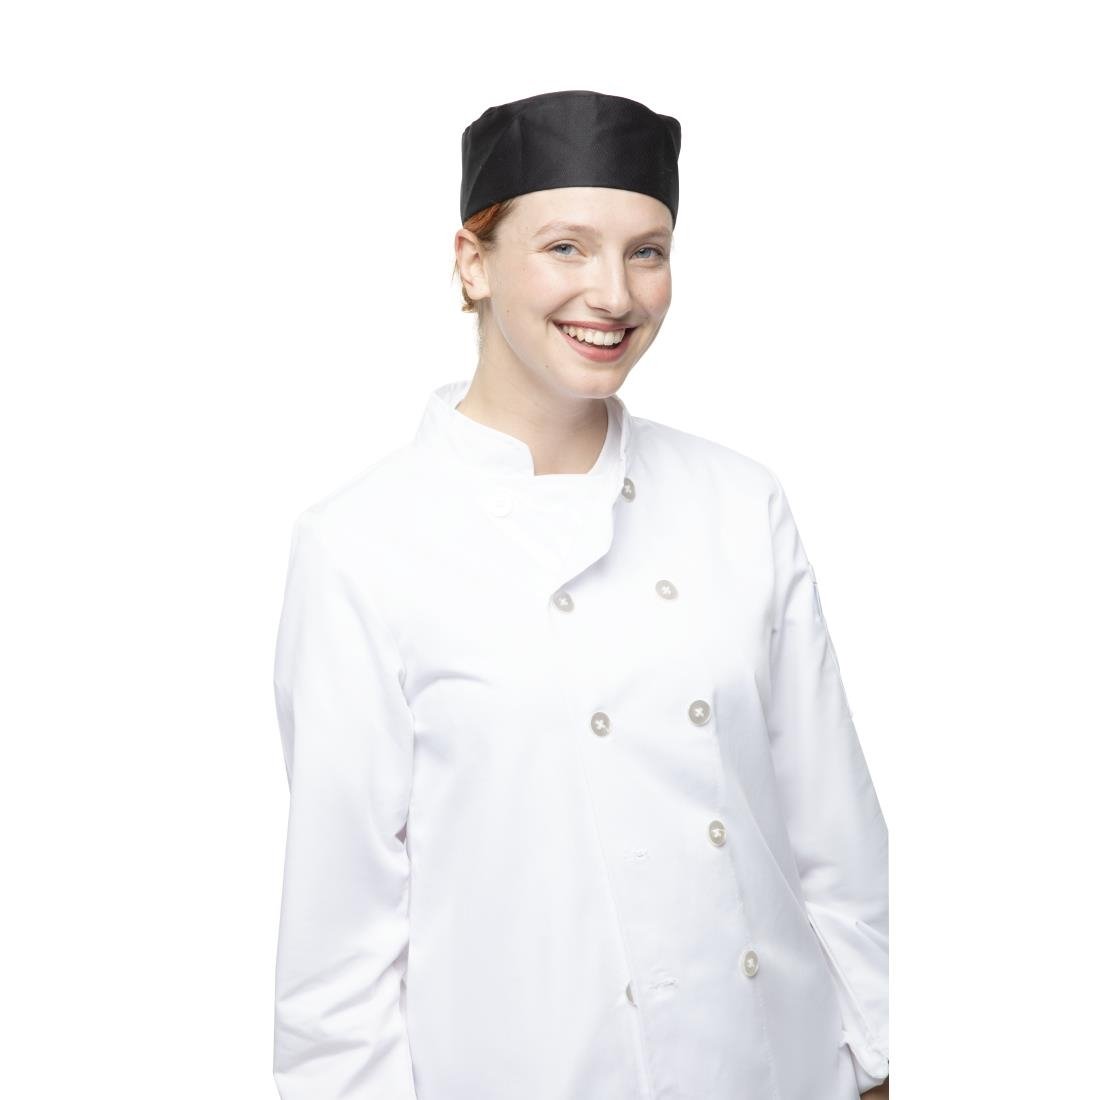 A206-M Whites Chef Skull Cap Polycotton Black - M JD Catering Equipment Solutions Ltd